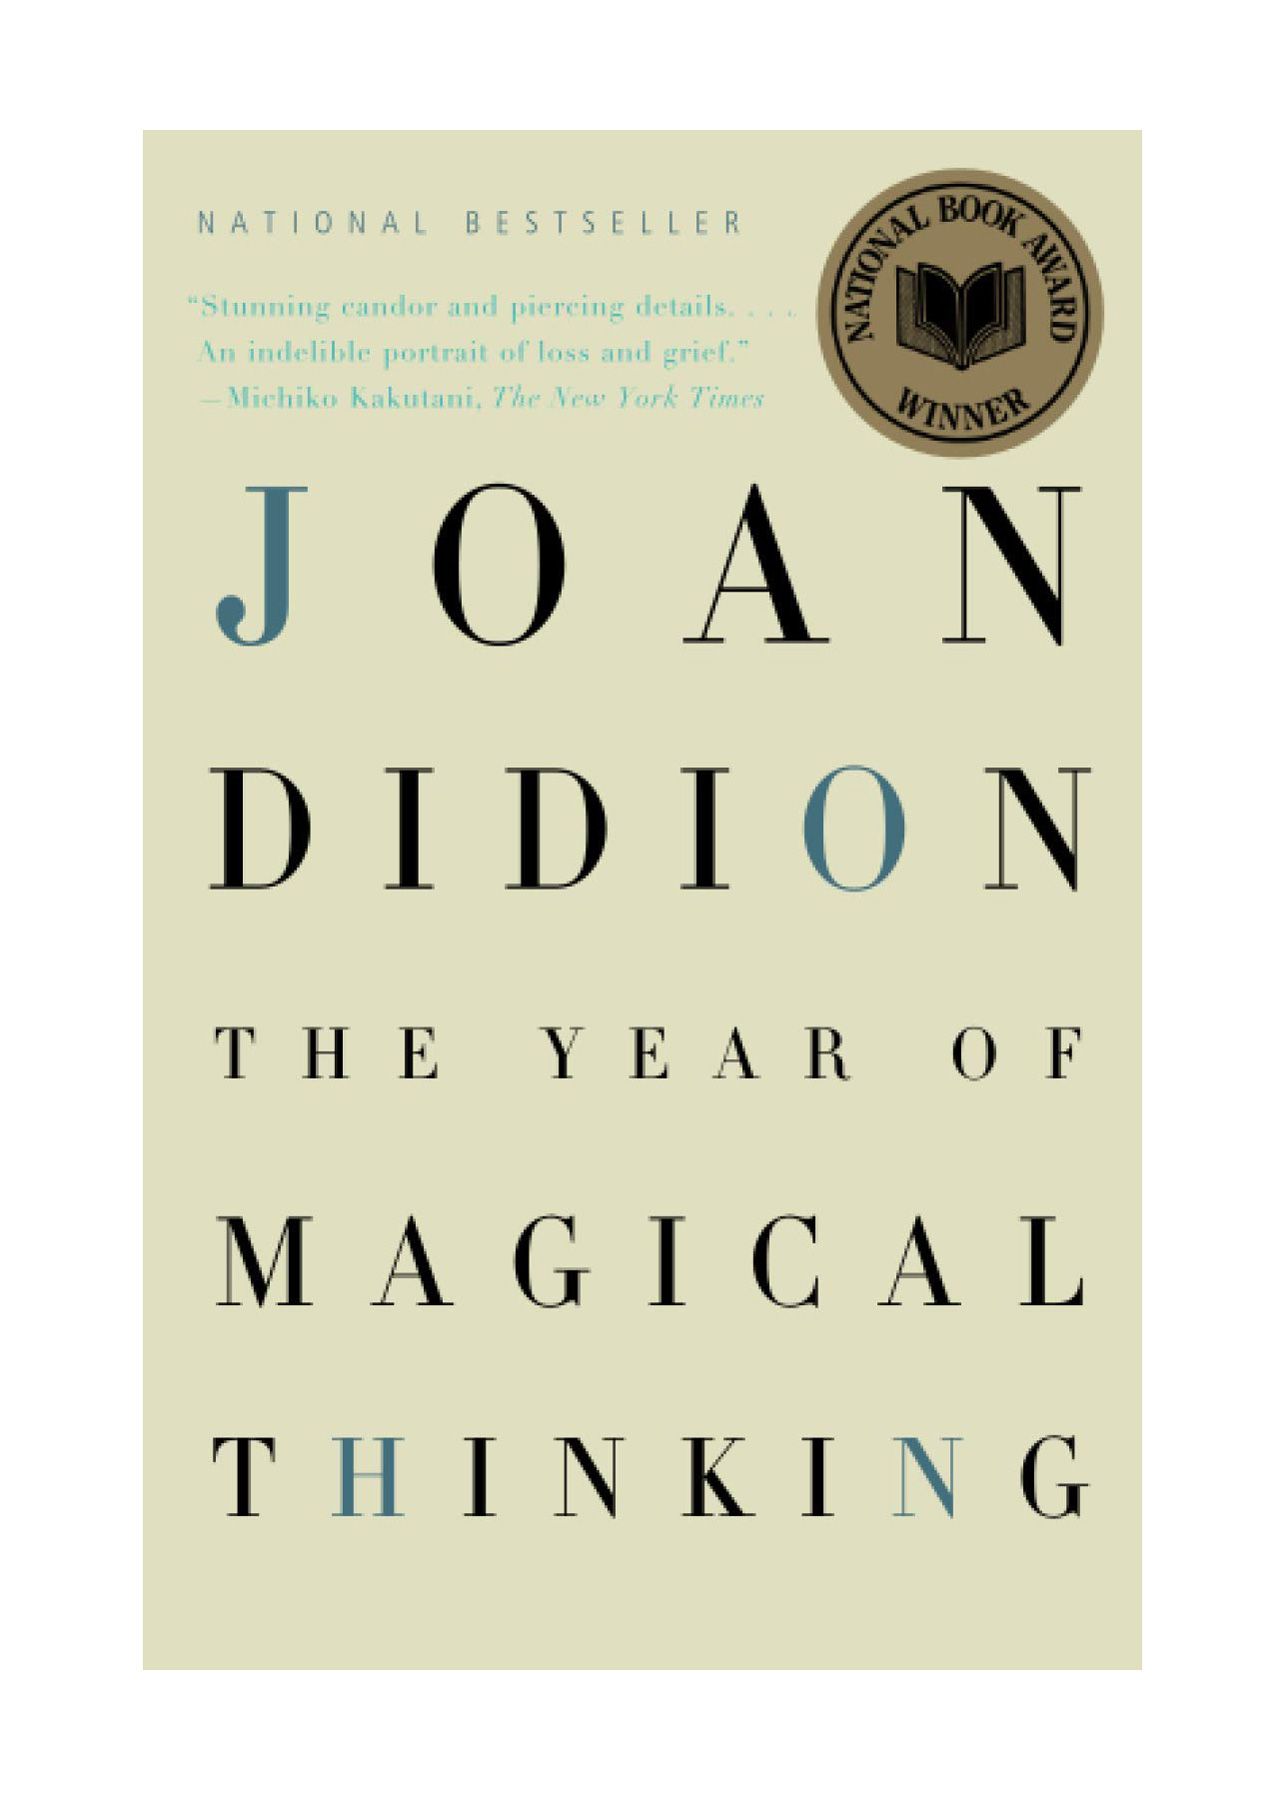 Good Books to Read in Your 20s: ‘The Year of Magical Thinking’ by Joan Didion